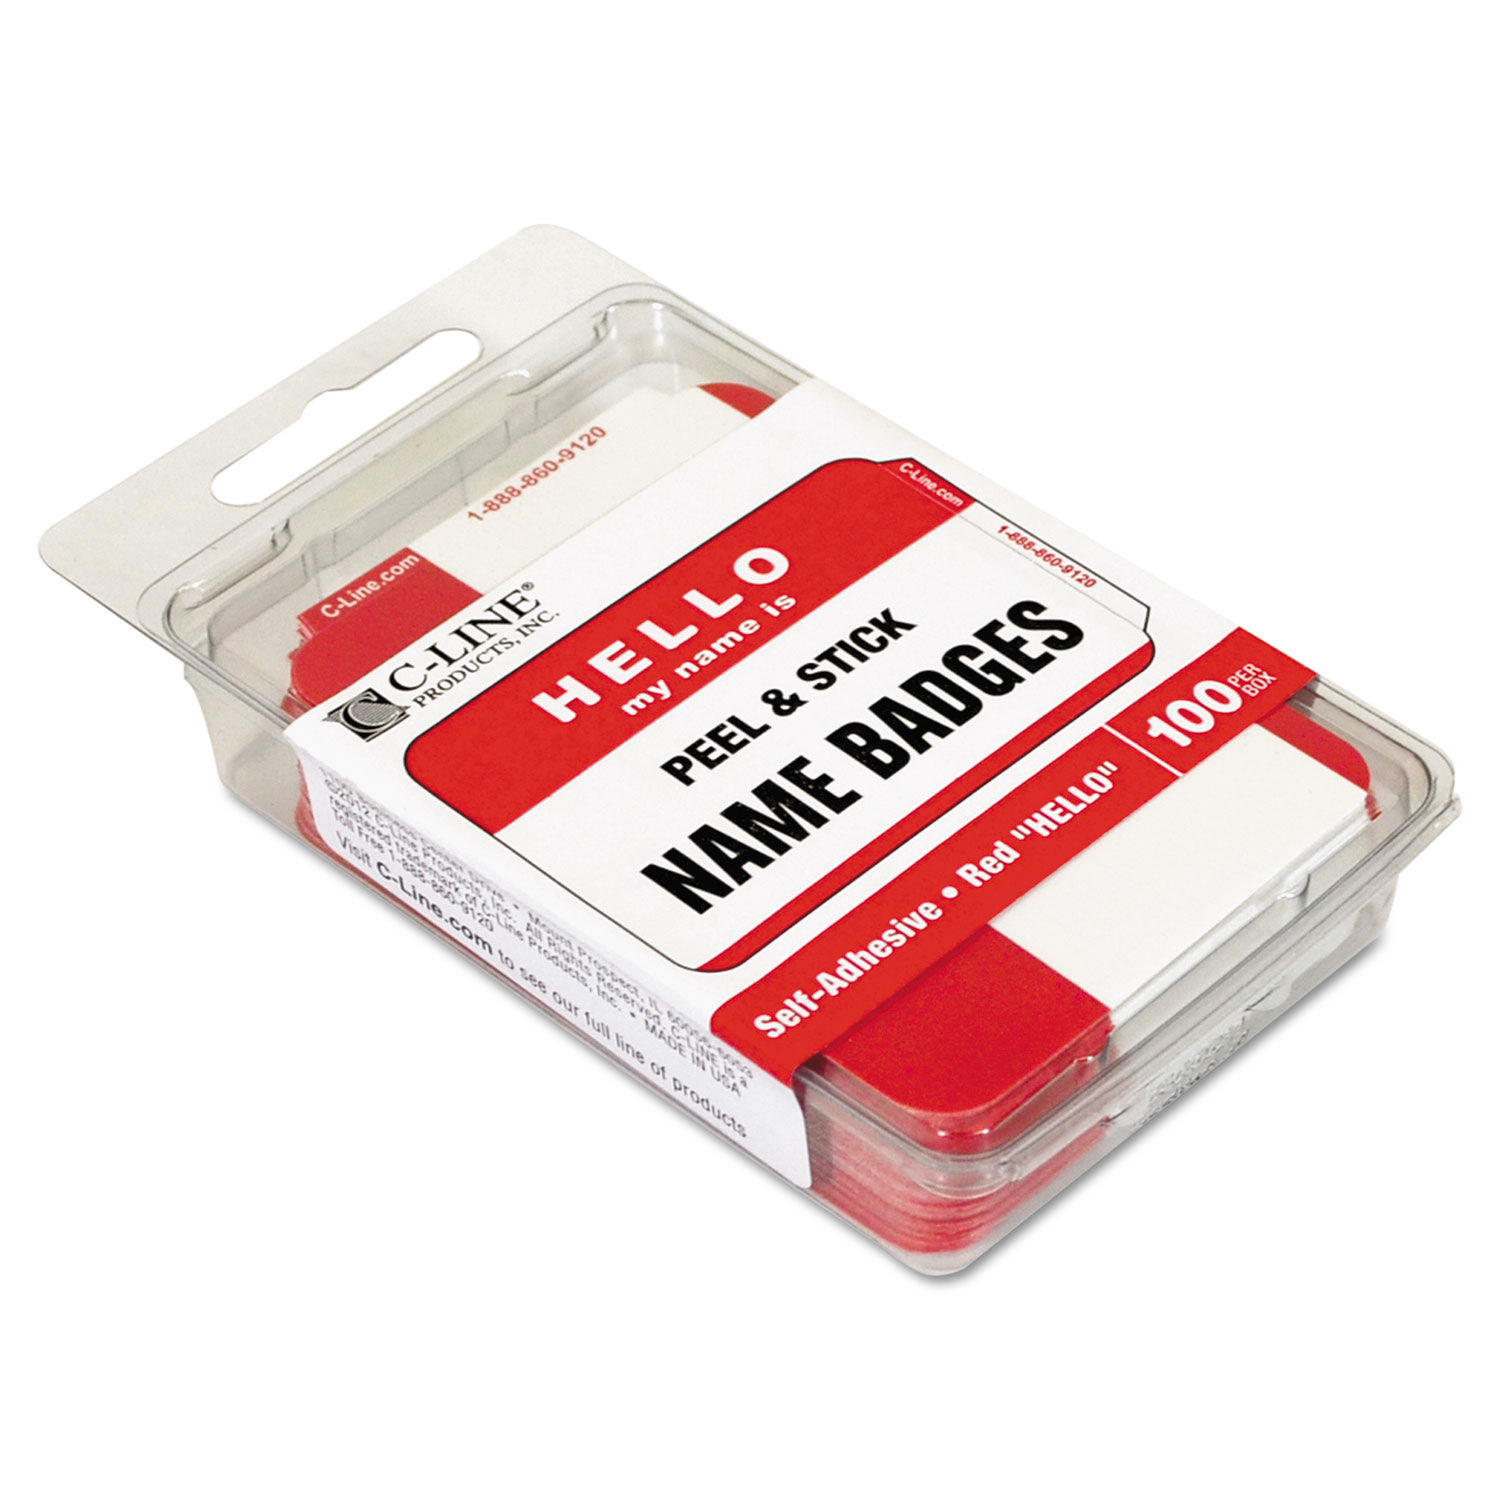 SELF-ADHESIVE NAME BADGES HELLO MY NAME IS, RED, 3.5 X 2.25, 100/BX